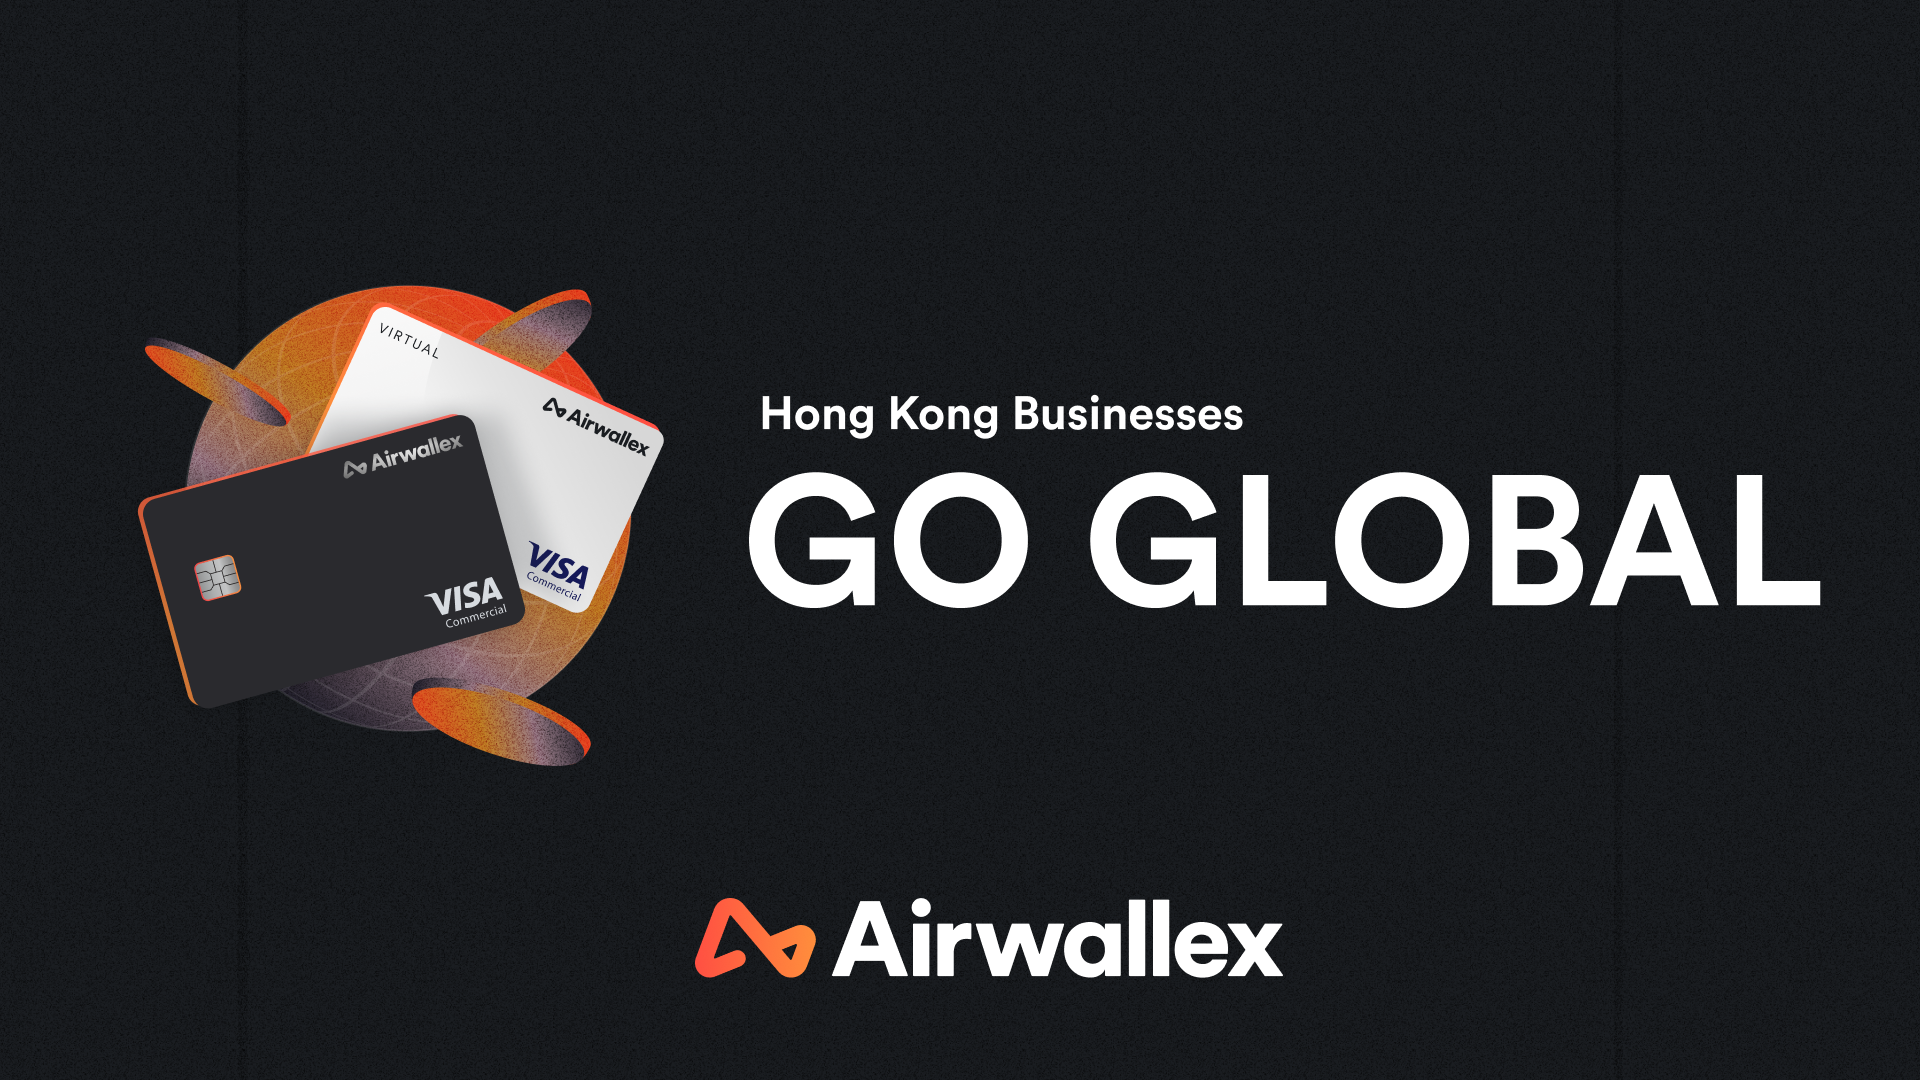 Airwallex Hong Kong sees strong growth momentum with 207% revenue increase